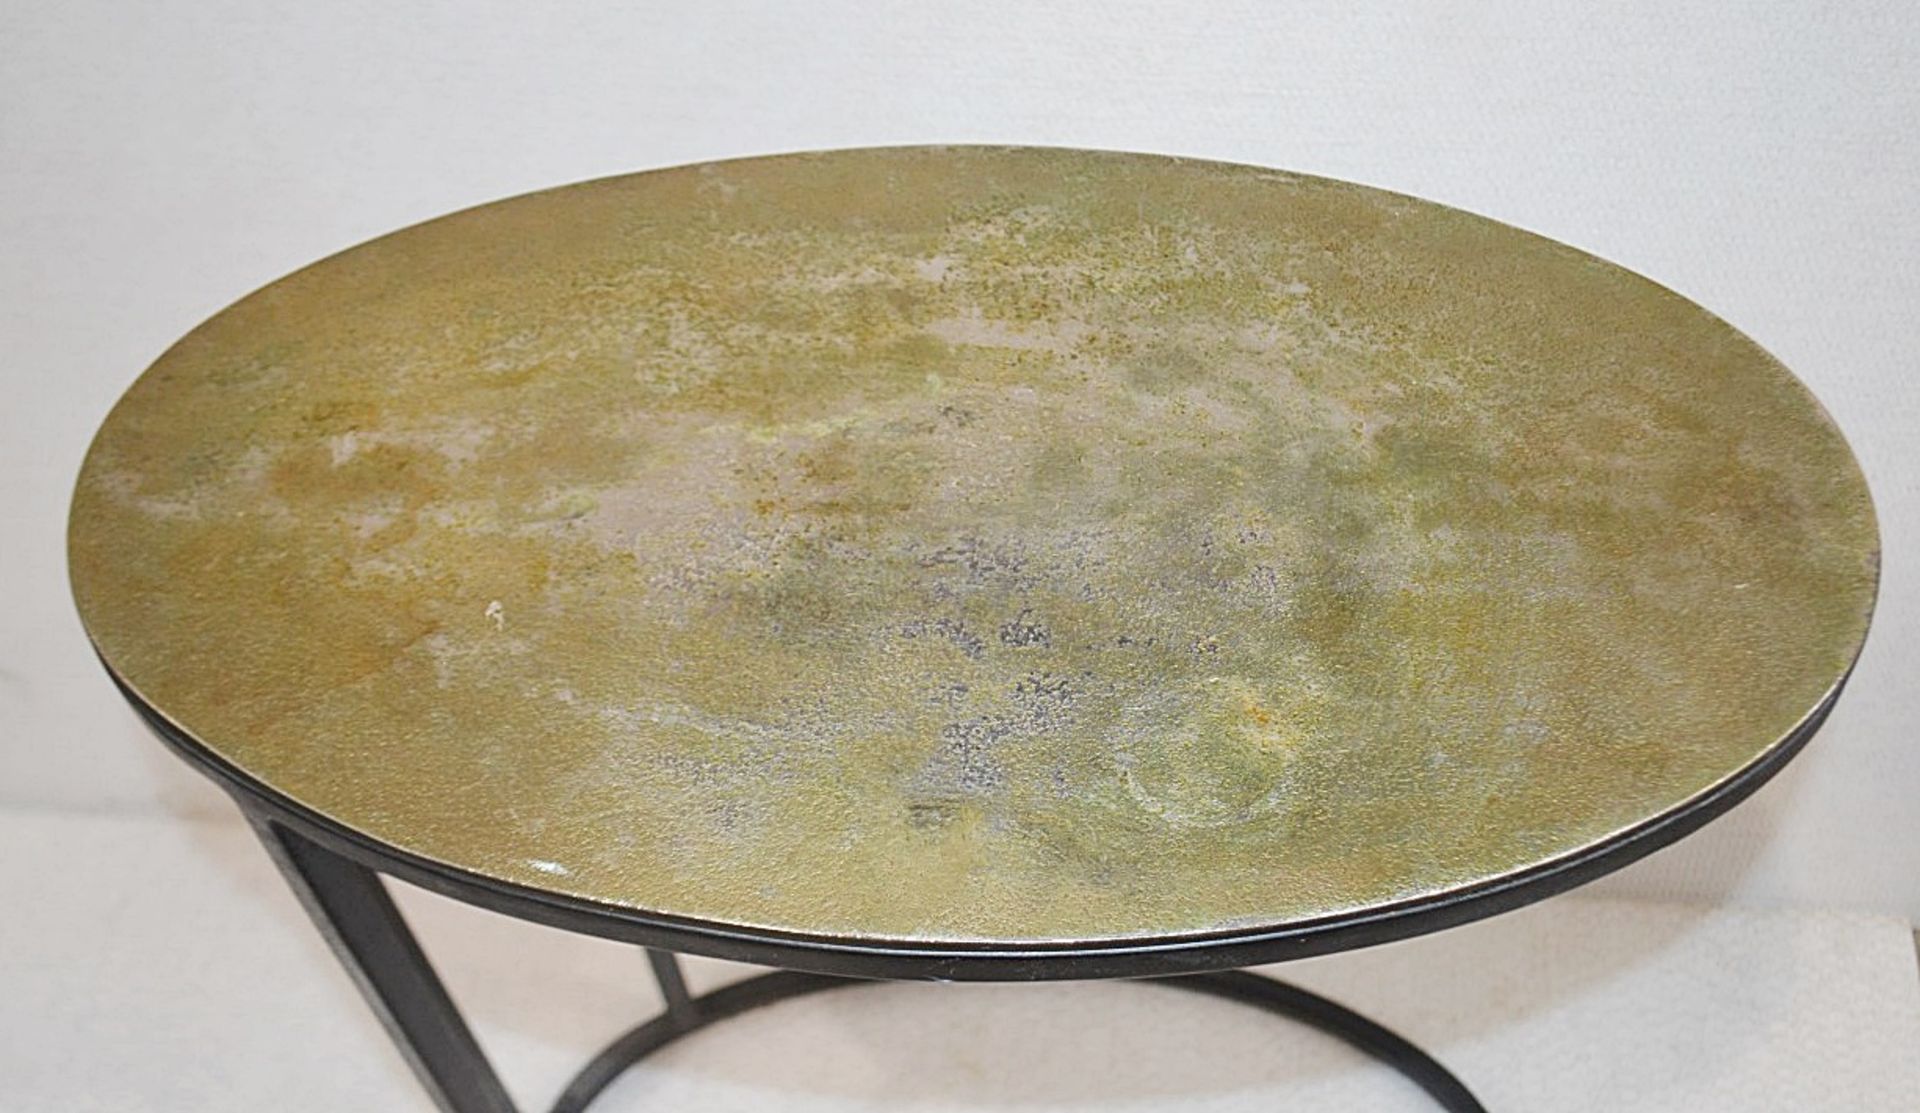 1 x Elegant Oval Shaped Side Table With A Slim Metal Base And Brass Finish - Dimensions: H59 x W28 x - Image 4 of 4